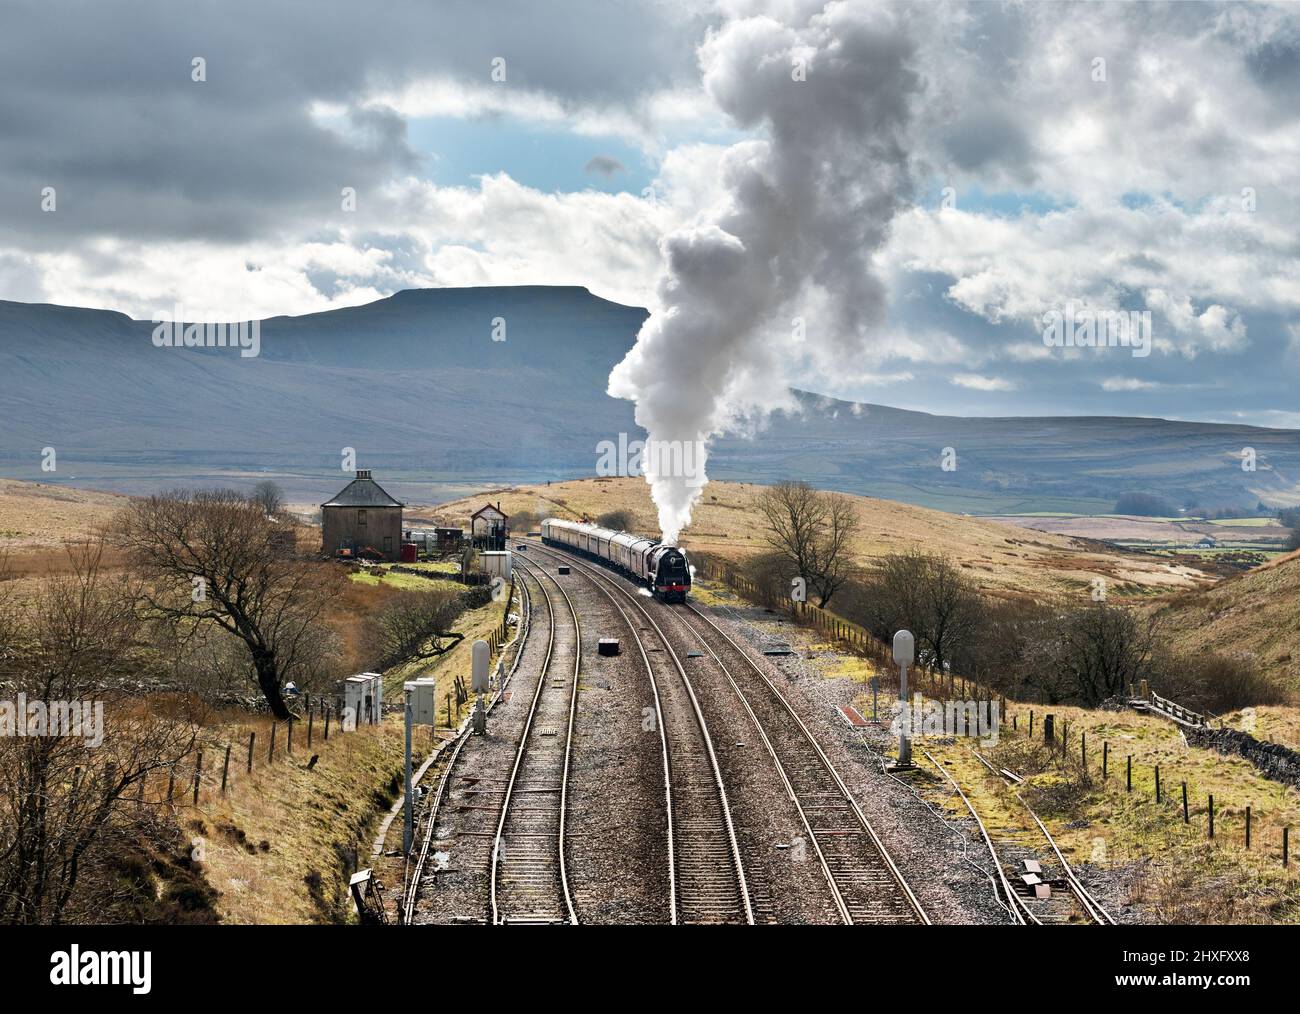 Locomotive 'The Duchess of Sutherland' with 'The Cumbrian Mountaineer', a Saturday steam special on the Settle-Carlisle railway. The train is seen at Blea Moor, after leaving the Ribblehead Viaduct bound for Carlisle. The strong back-winds carried the steam high into the air. Ingleborough peak is seen behind the train. Many people turned out to see this popular locomotive, as The Duchess of Sutherland, built in 1938, is now based in the south of England and has not been seen on the Settle-Carlisle railway line for some years. Credit: John Bentley/Alamy Live News Stock Photo